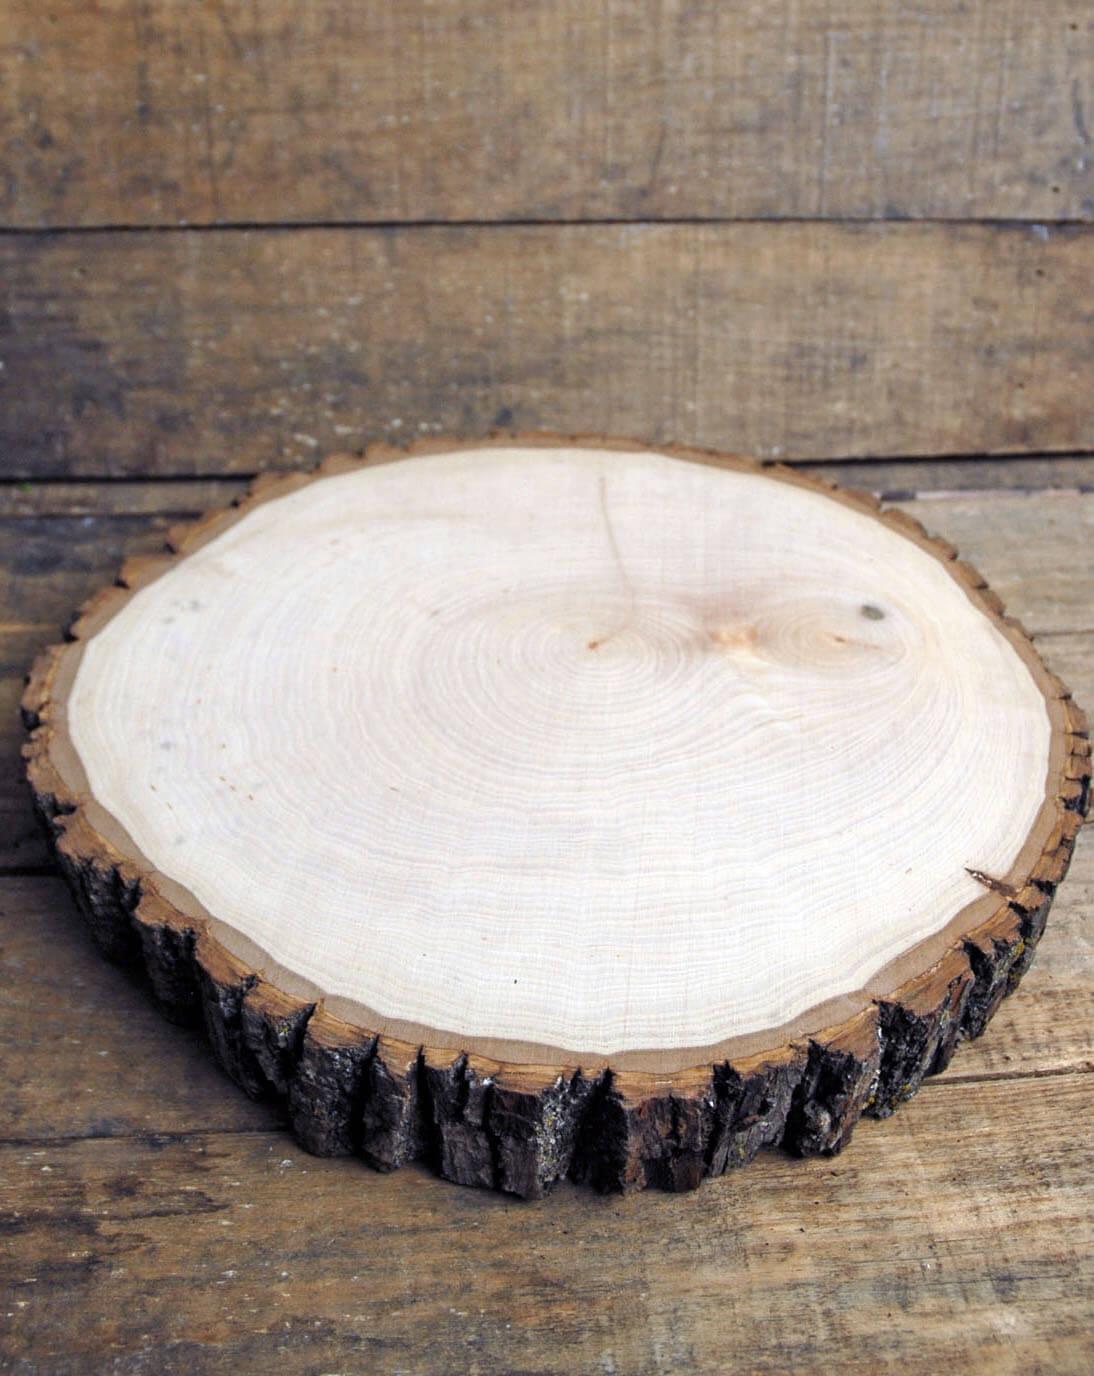 3 Pcs Large Wood Slices For Centerpieces, Wood Rounds For Wedding